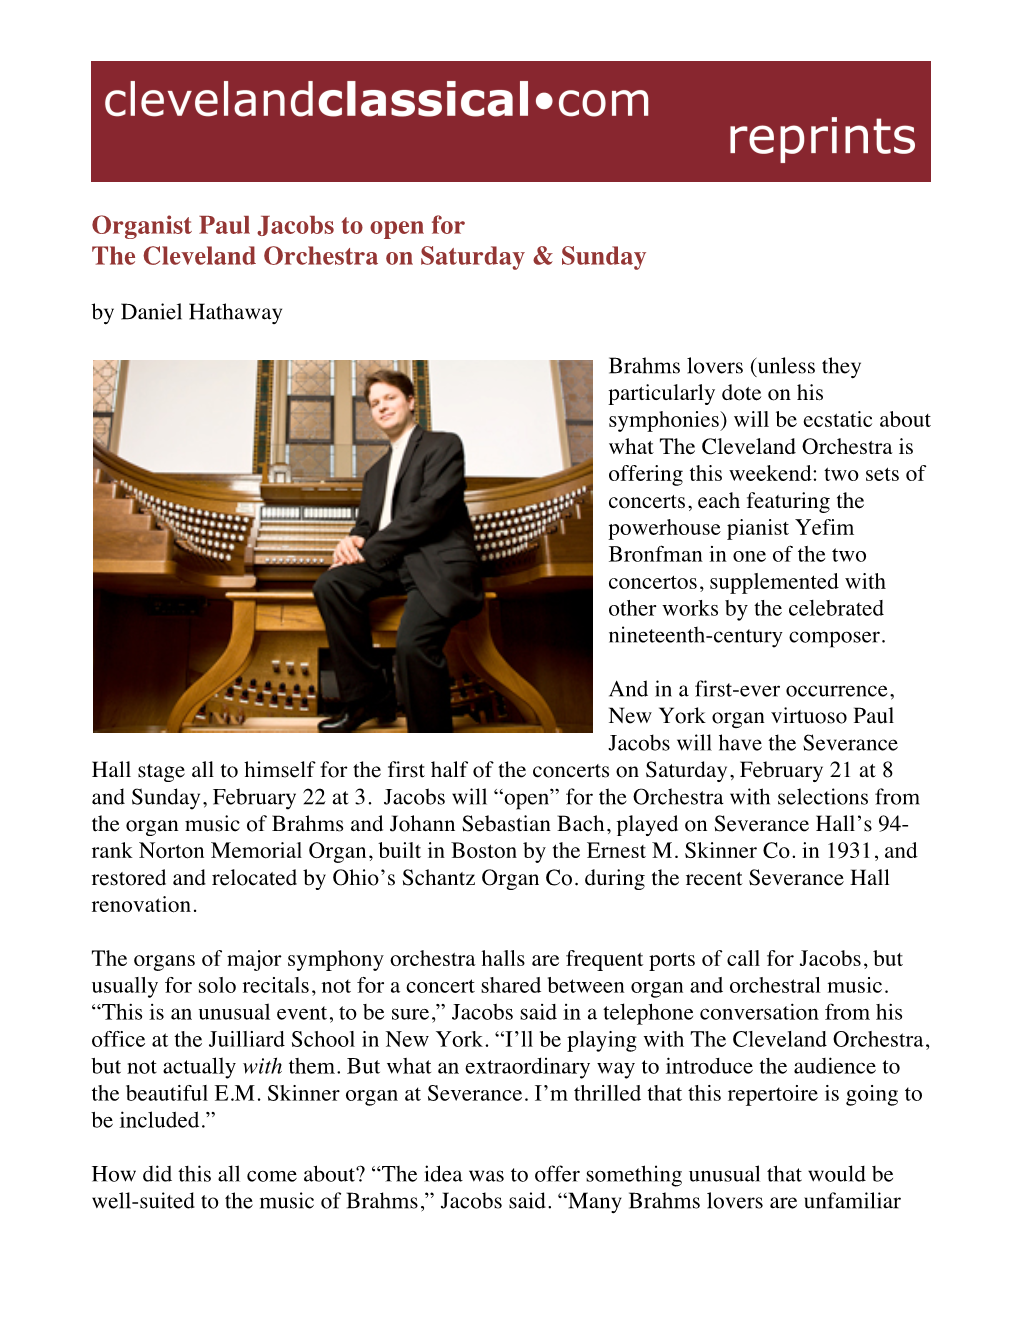 Organist Paul Jacobs to Open for the Cleveland Orchestra on Saturday & Sunday by Daniel Hathaway